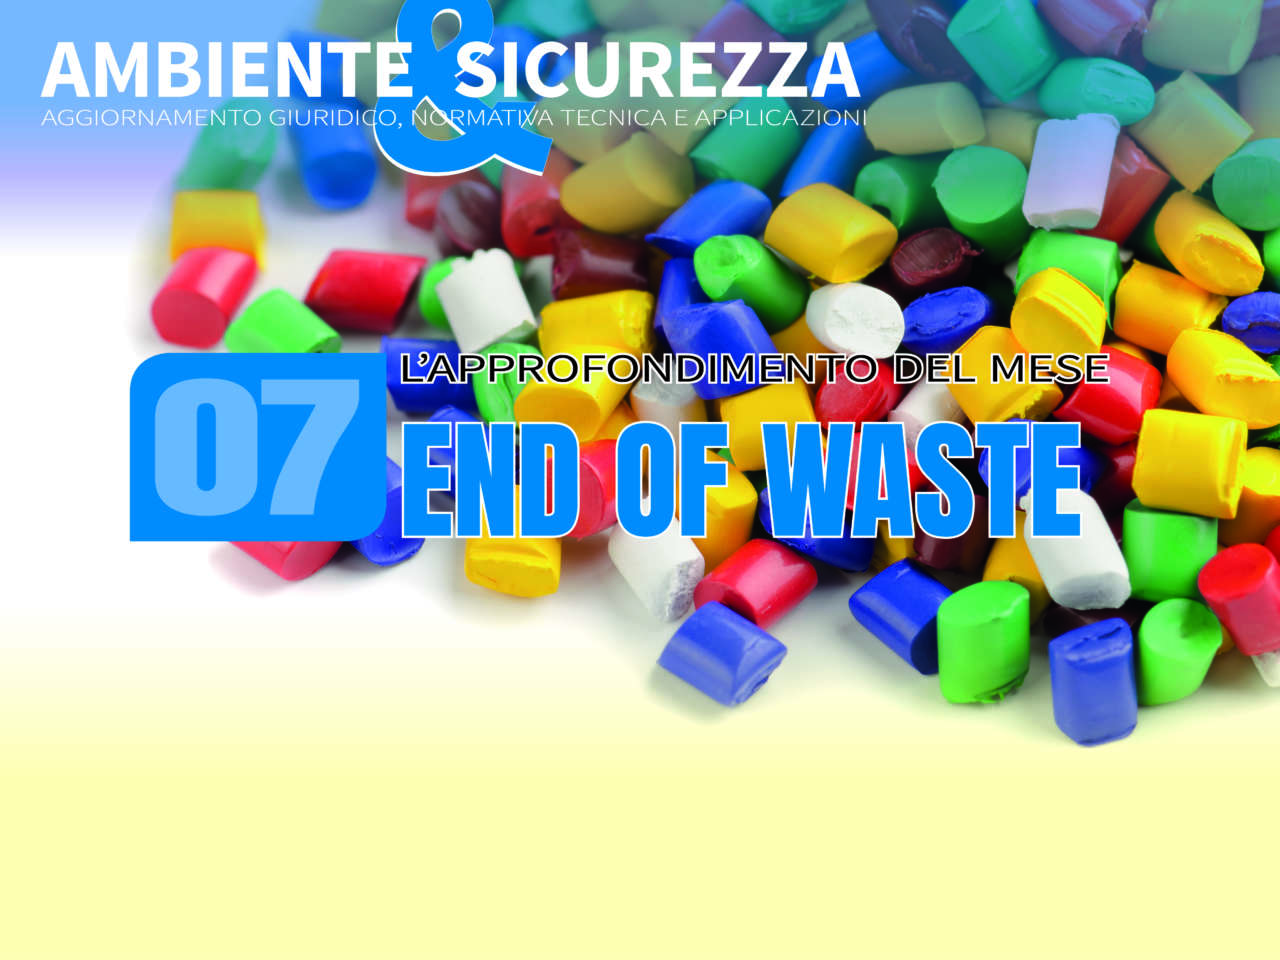 End of waste